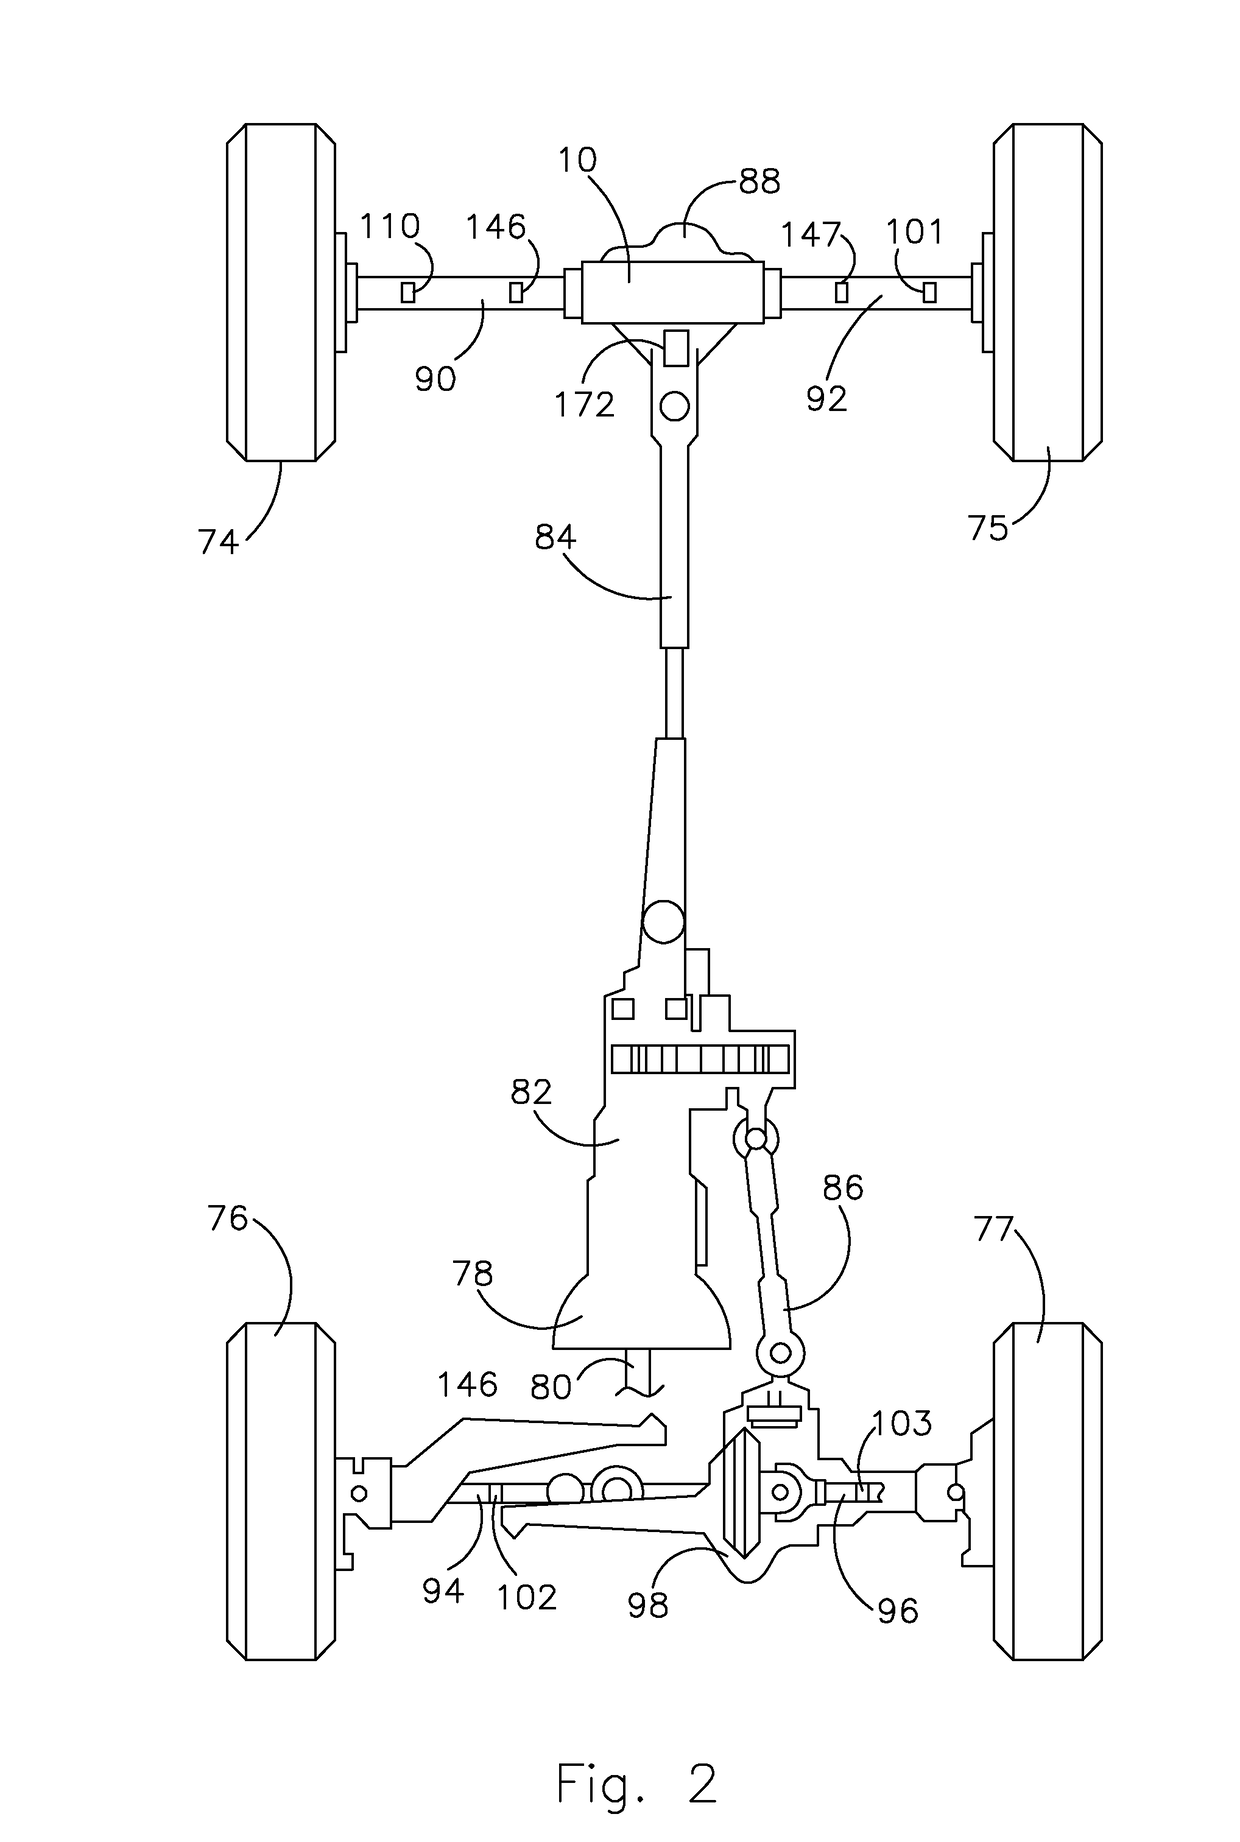 Controlling wheel hop in a vehicle axle